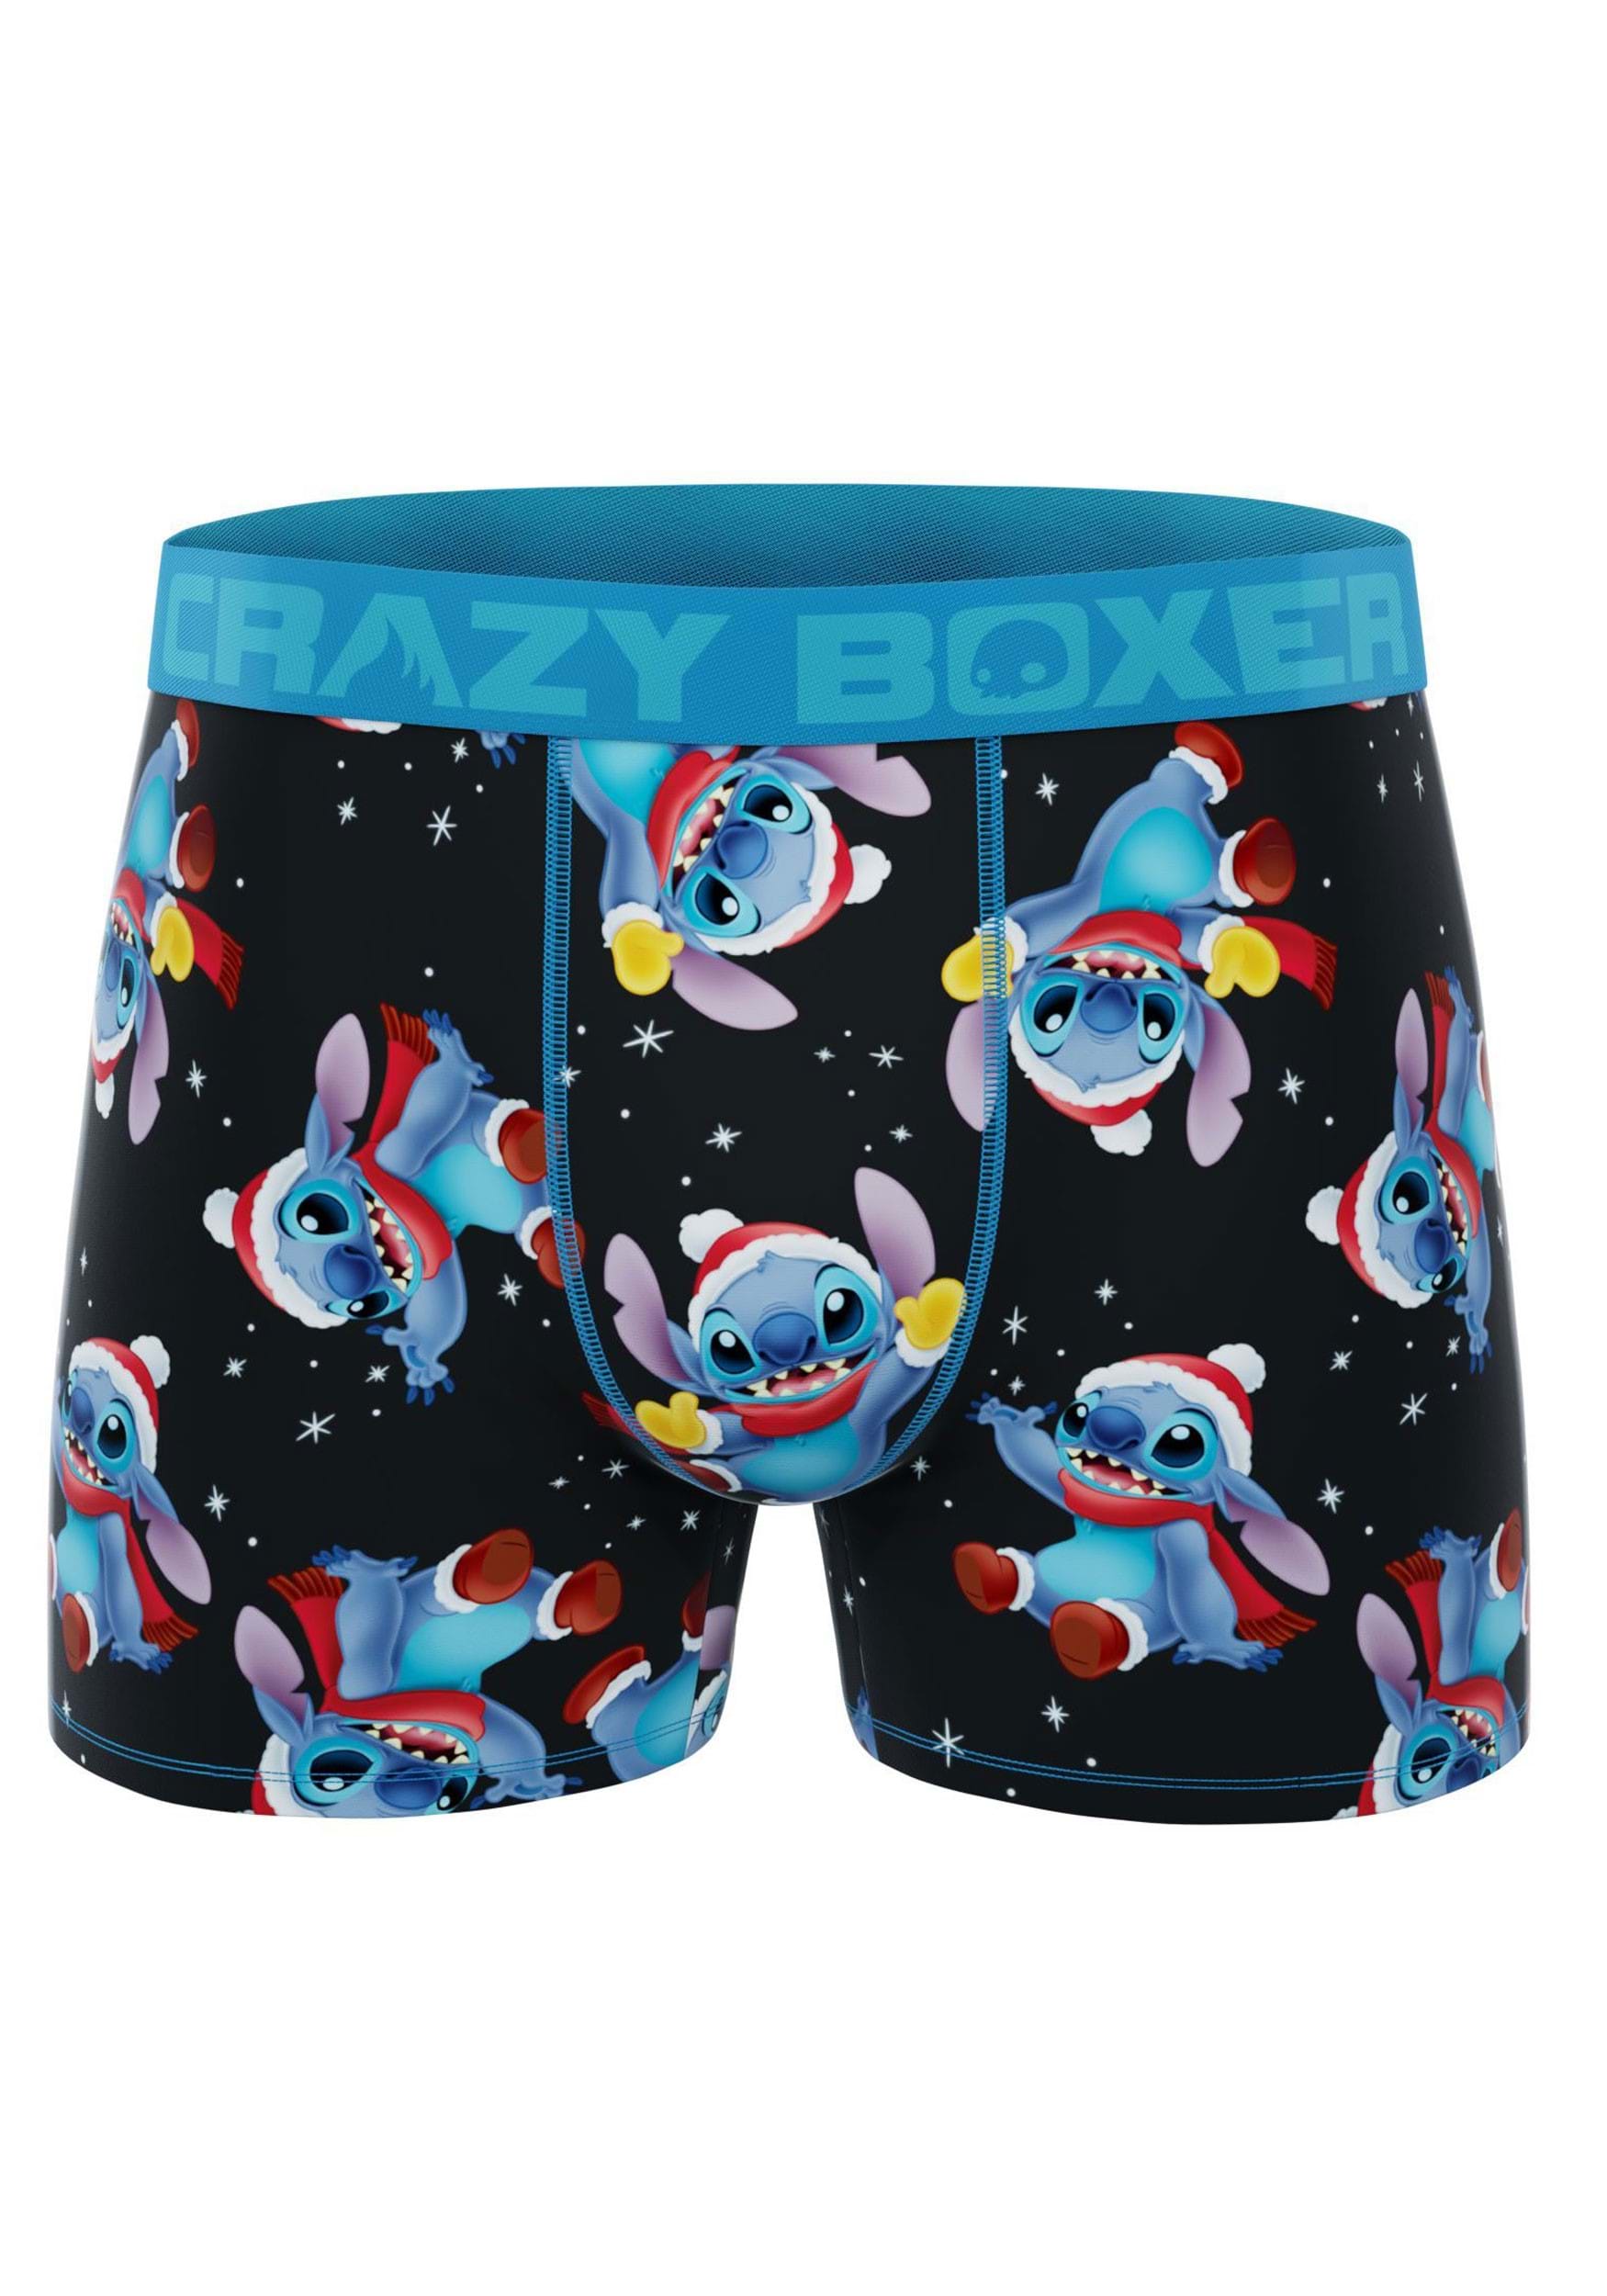 https://images.fun.co.uk/products/79248/1-1/disney-lilo-and-stitch-christmas-boxer-briefs-for-men.jpg